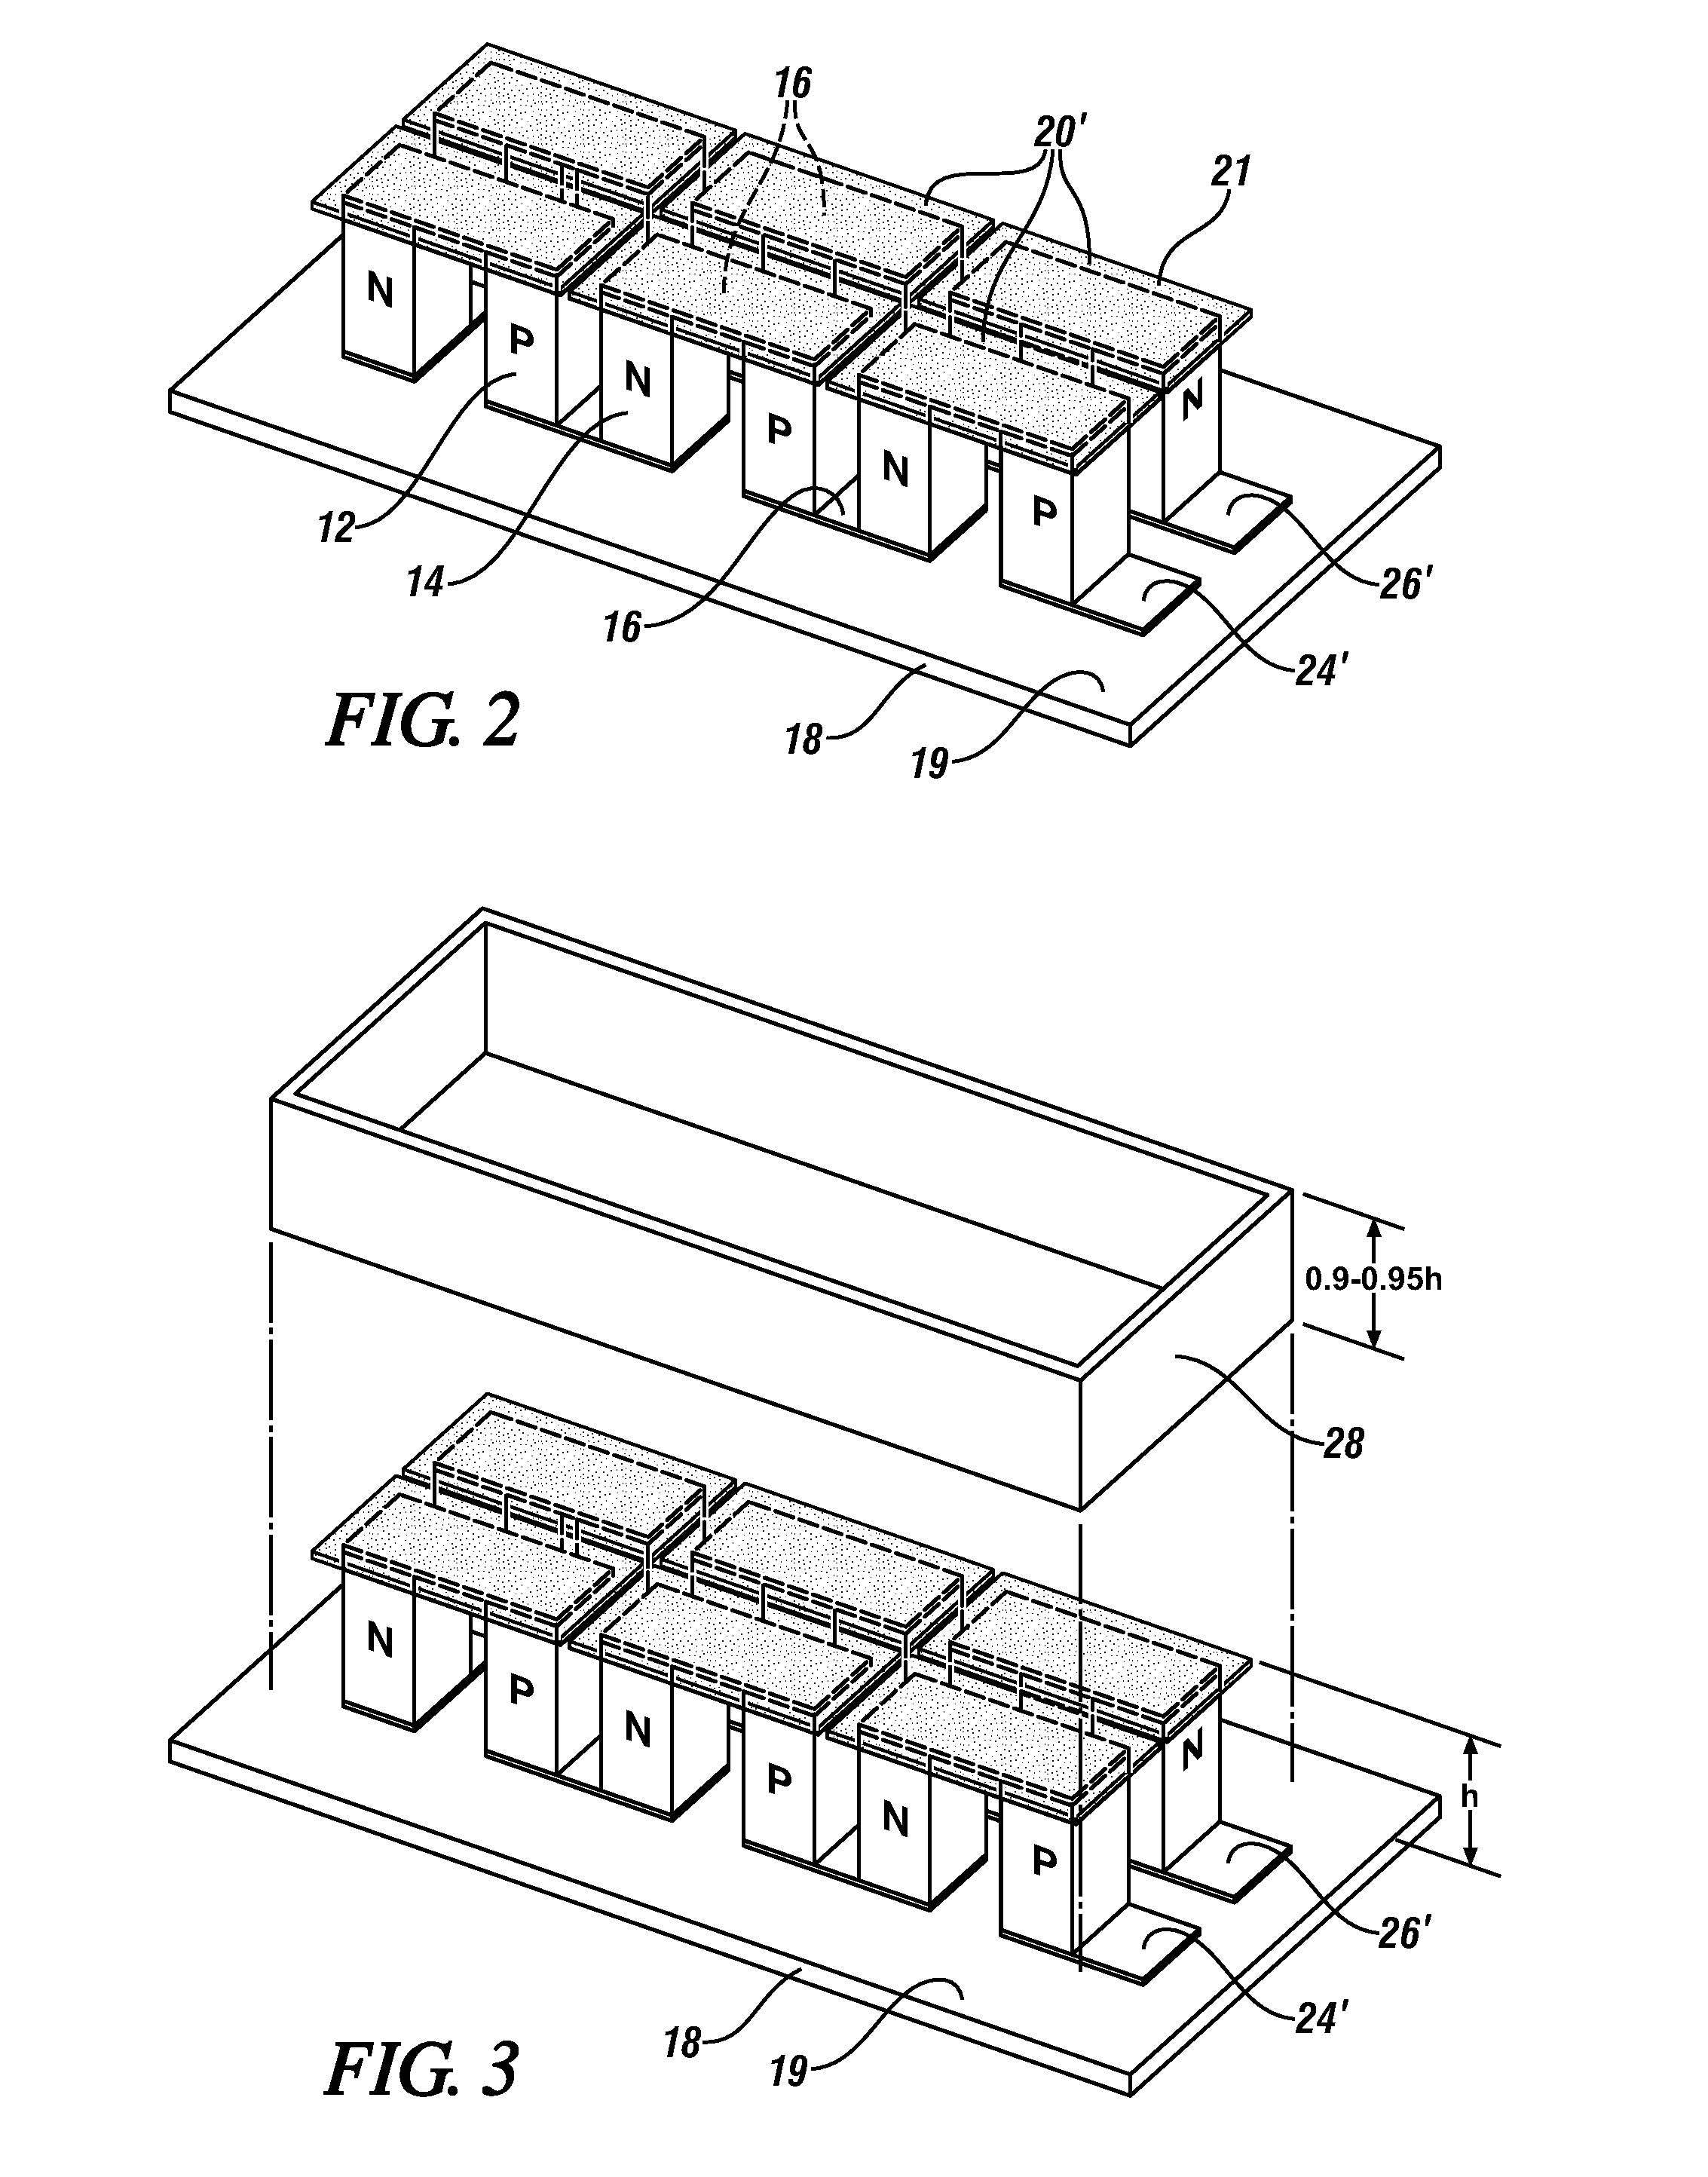 Encapsulation of high temperature thermoelectric modules